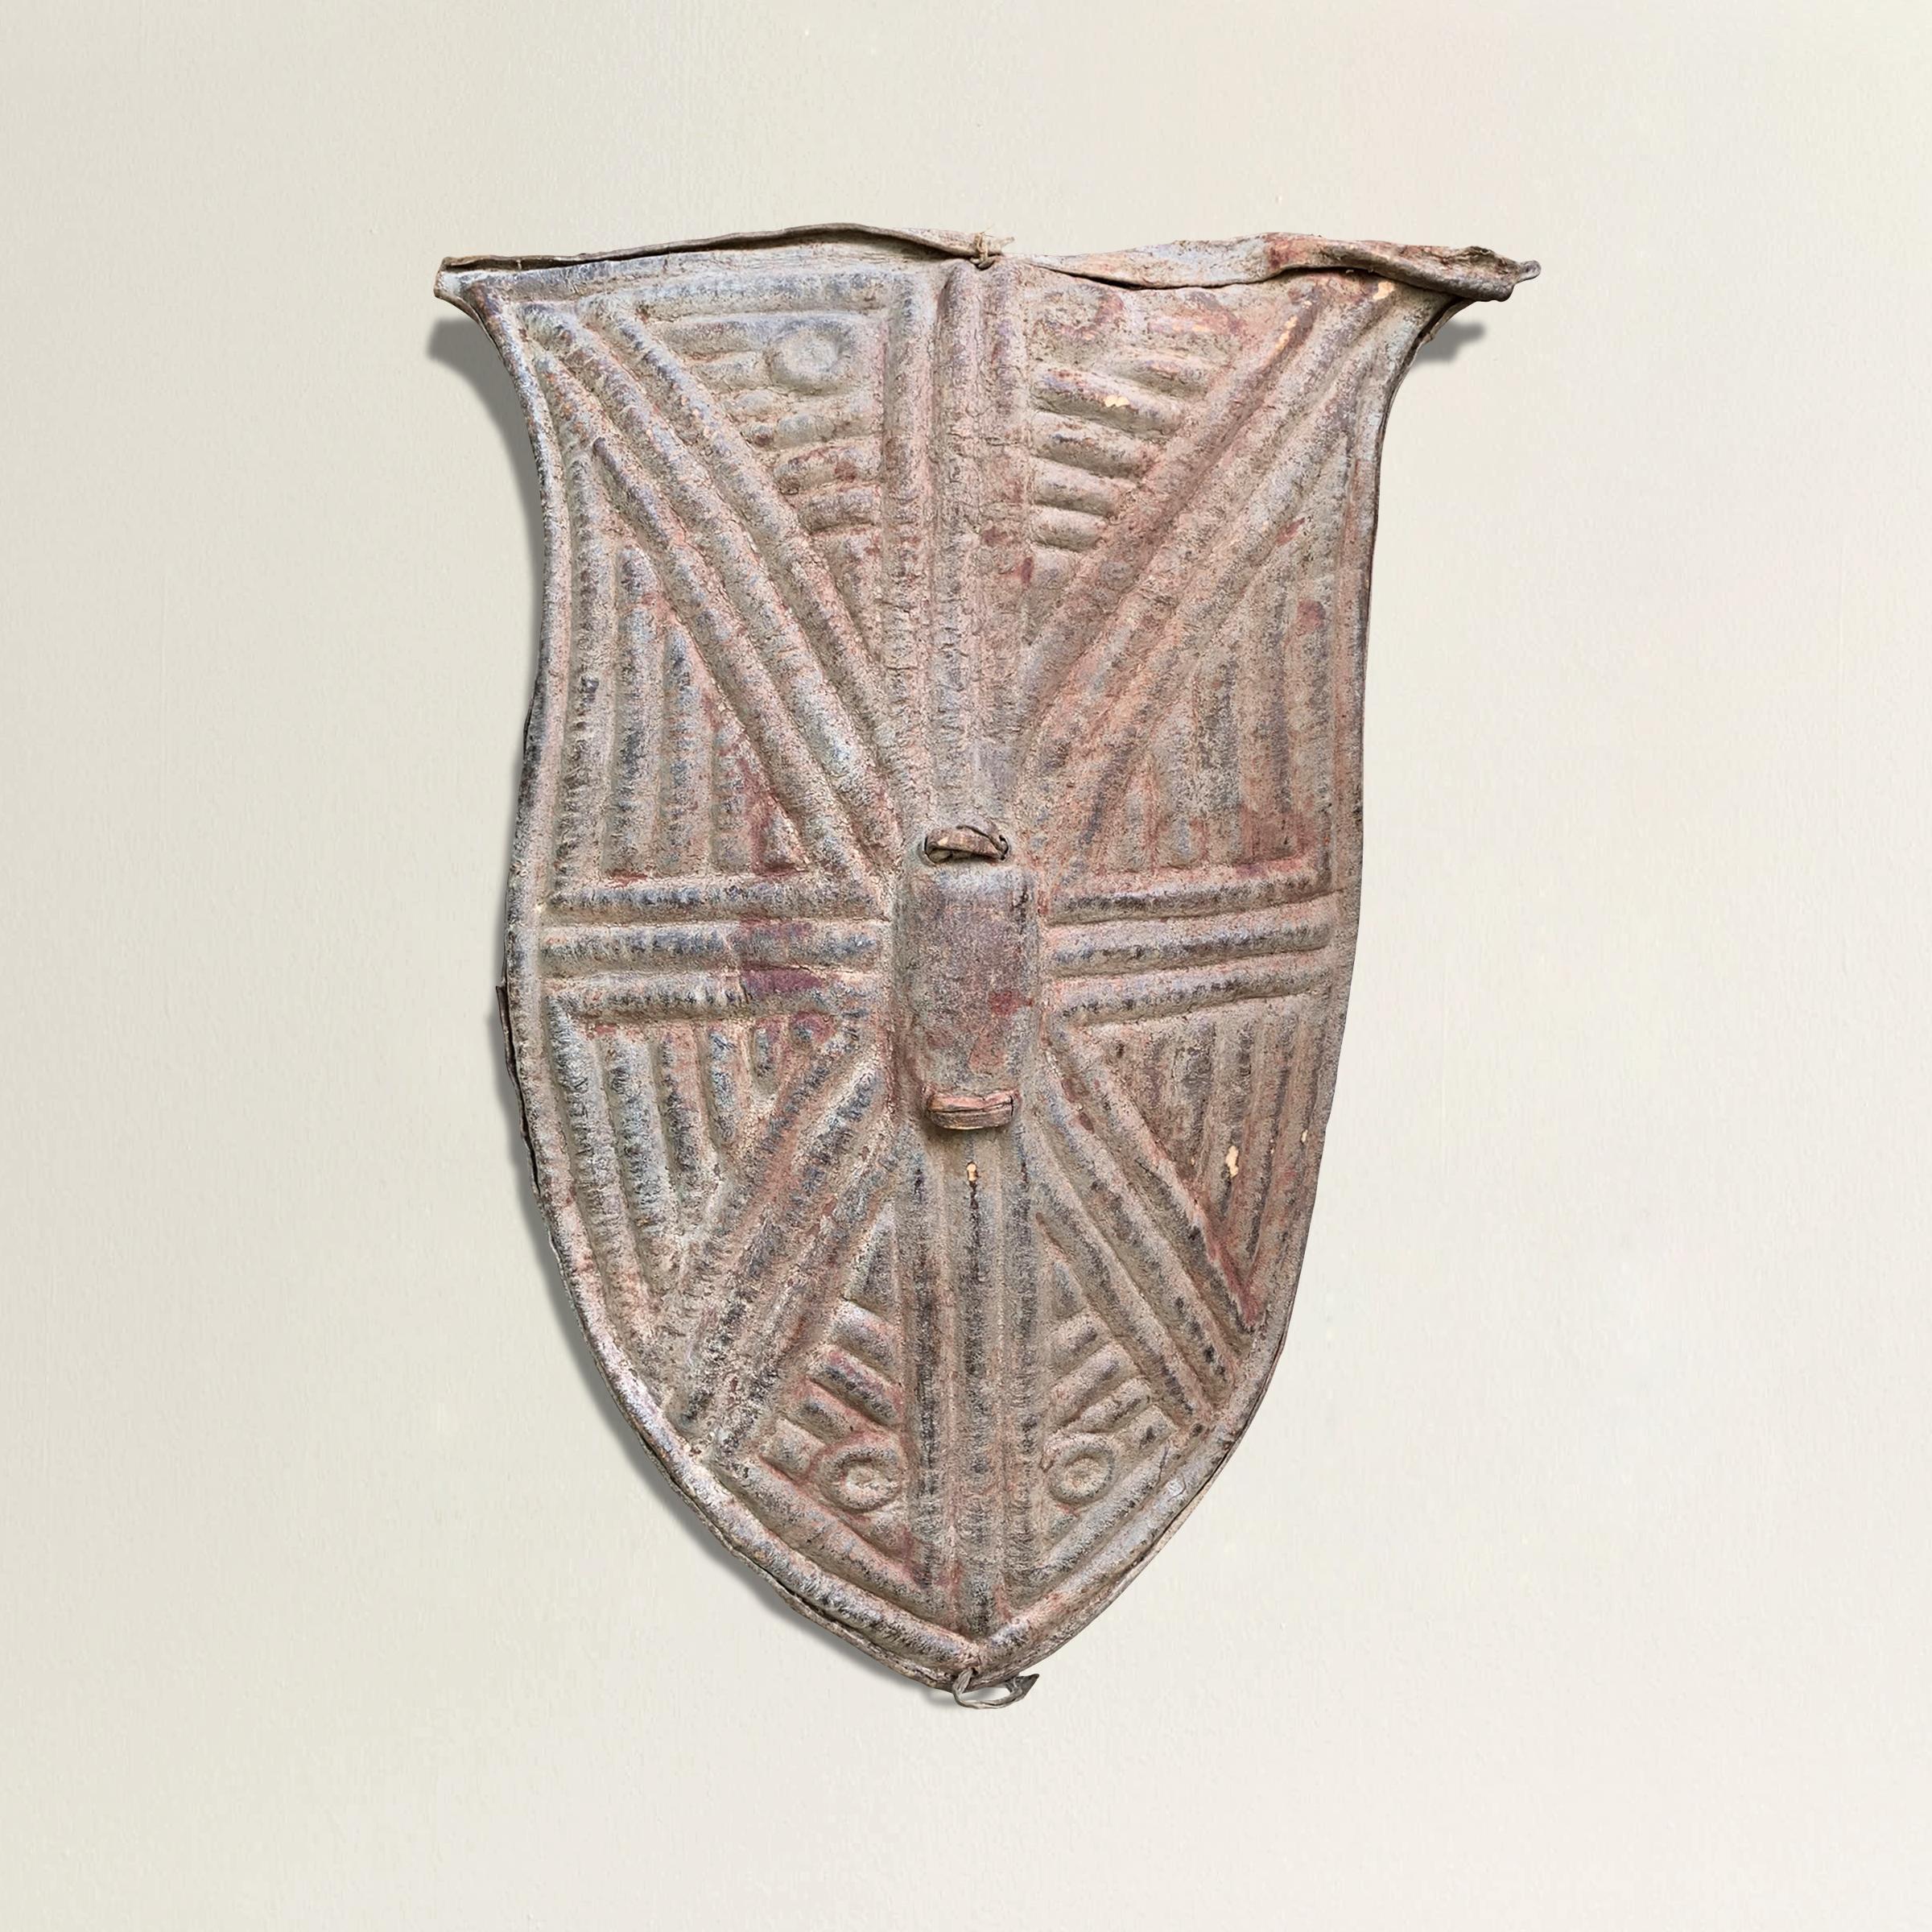 A wonderfully sculptural Kirdi leather shield from Cameroon, with a beautiful geometric pattern that's been 'stamped' into the leather resulting a raised surface on the face of the shield. We've had a custom steel mount made so that the piece can